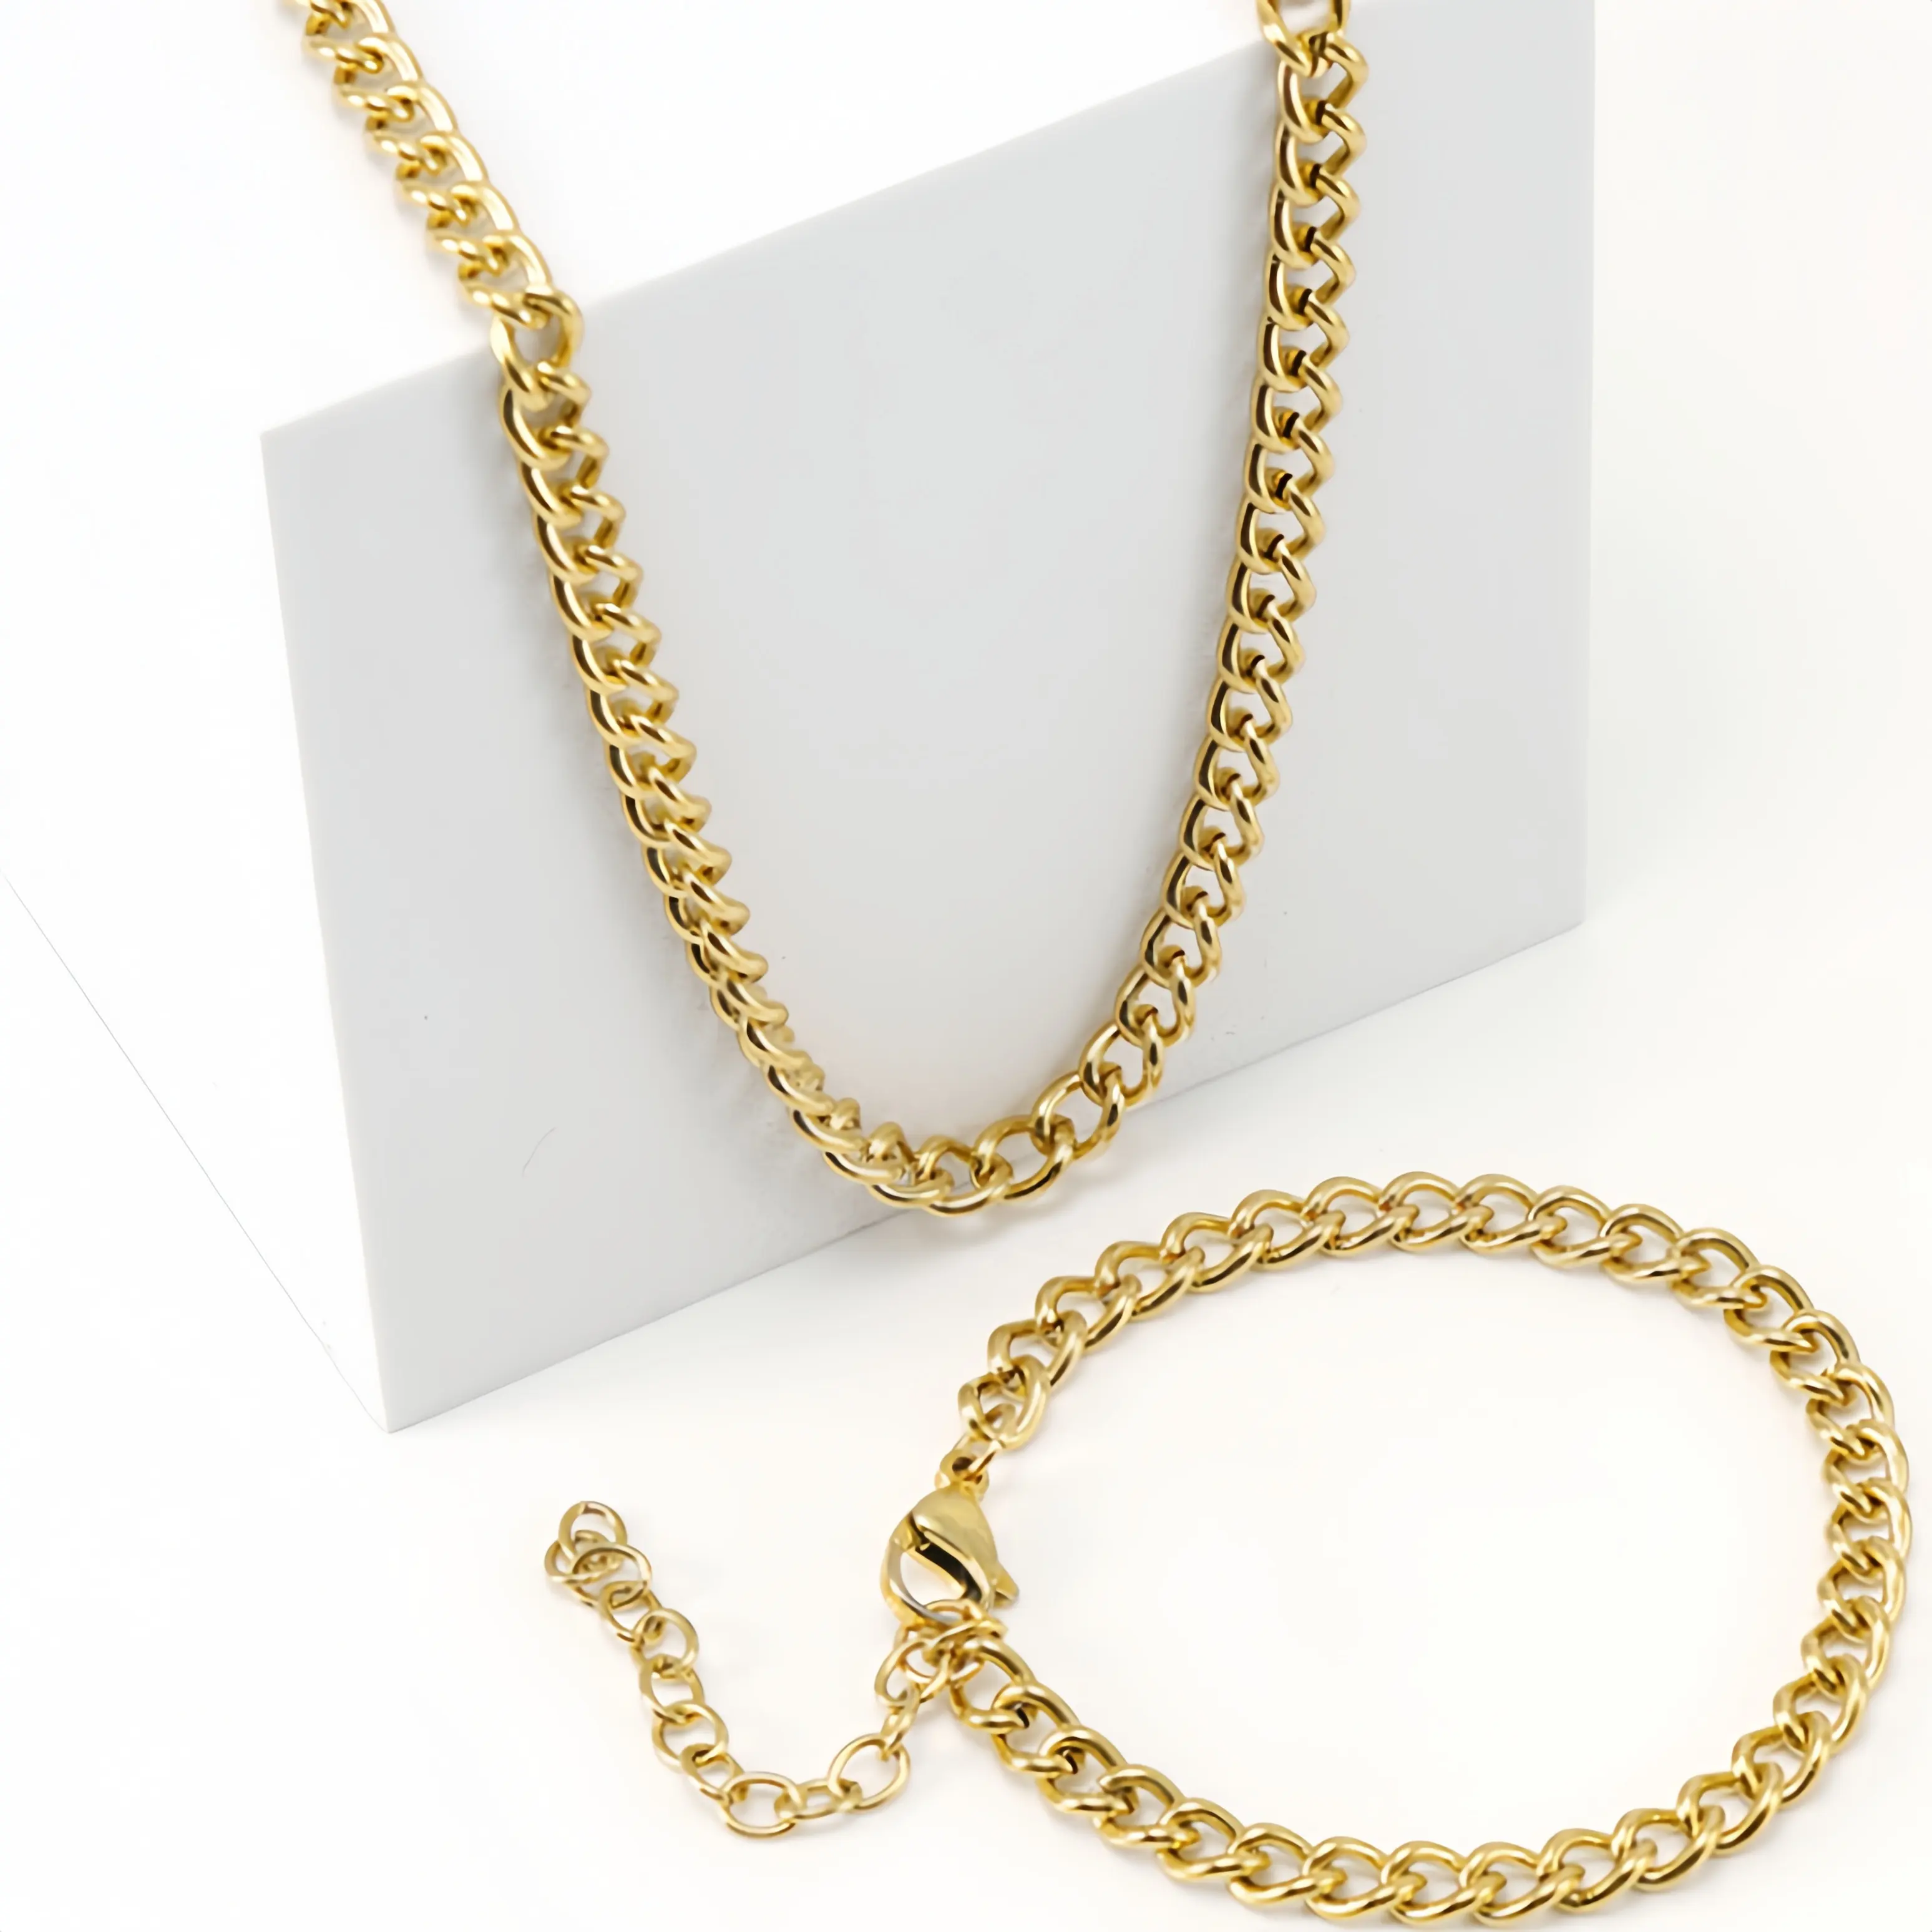 Wholesale Hiphop Fashion Jewelry Set 18K Gold-Plated Stainless Steel Bracelet Necklace DIY Jewelry Cuban Link Chain